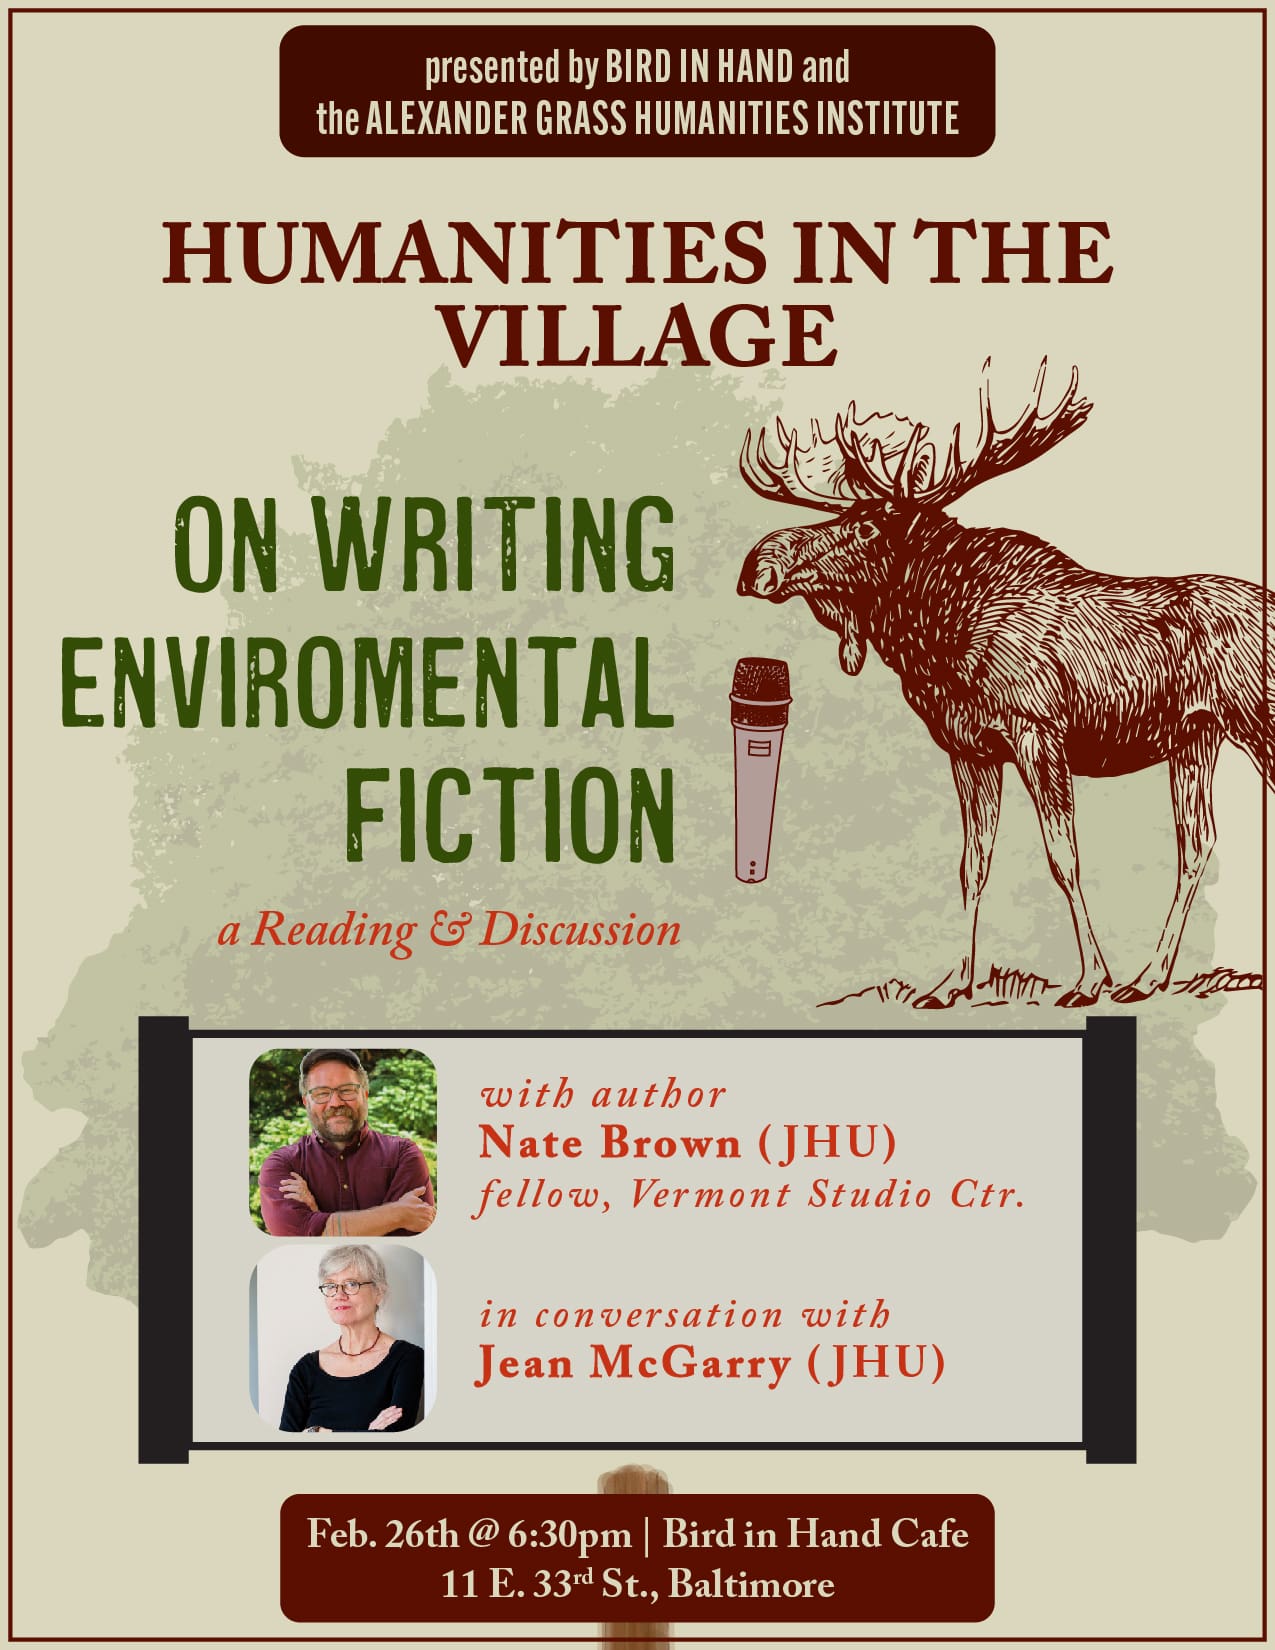 Poster for Humanities in the Village reading and discussion "On Writing Environmental Fiction," with illustration of a moose speaking into a mic.